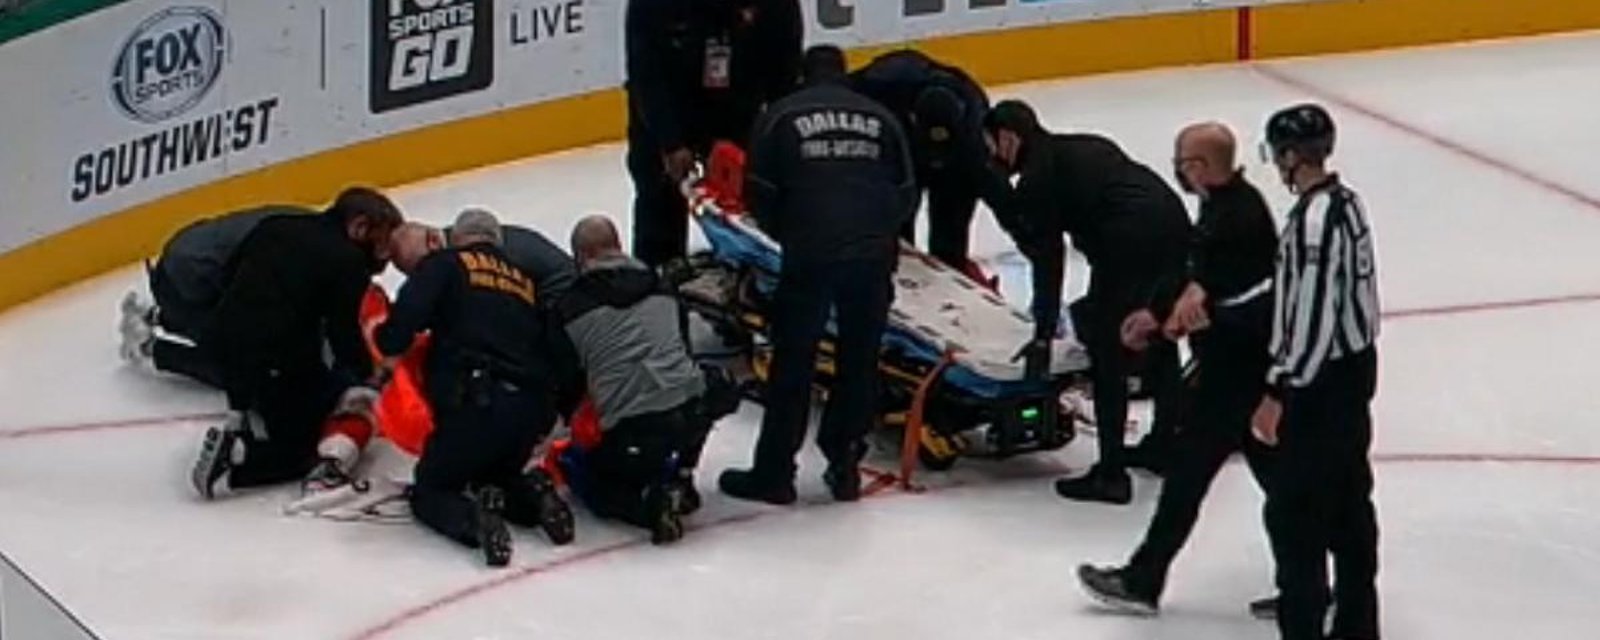 Early update on Aaron Ekblad who left the game on a stretcher.